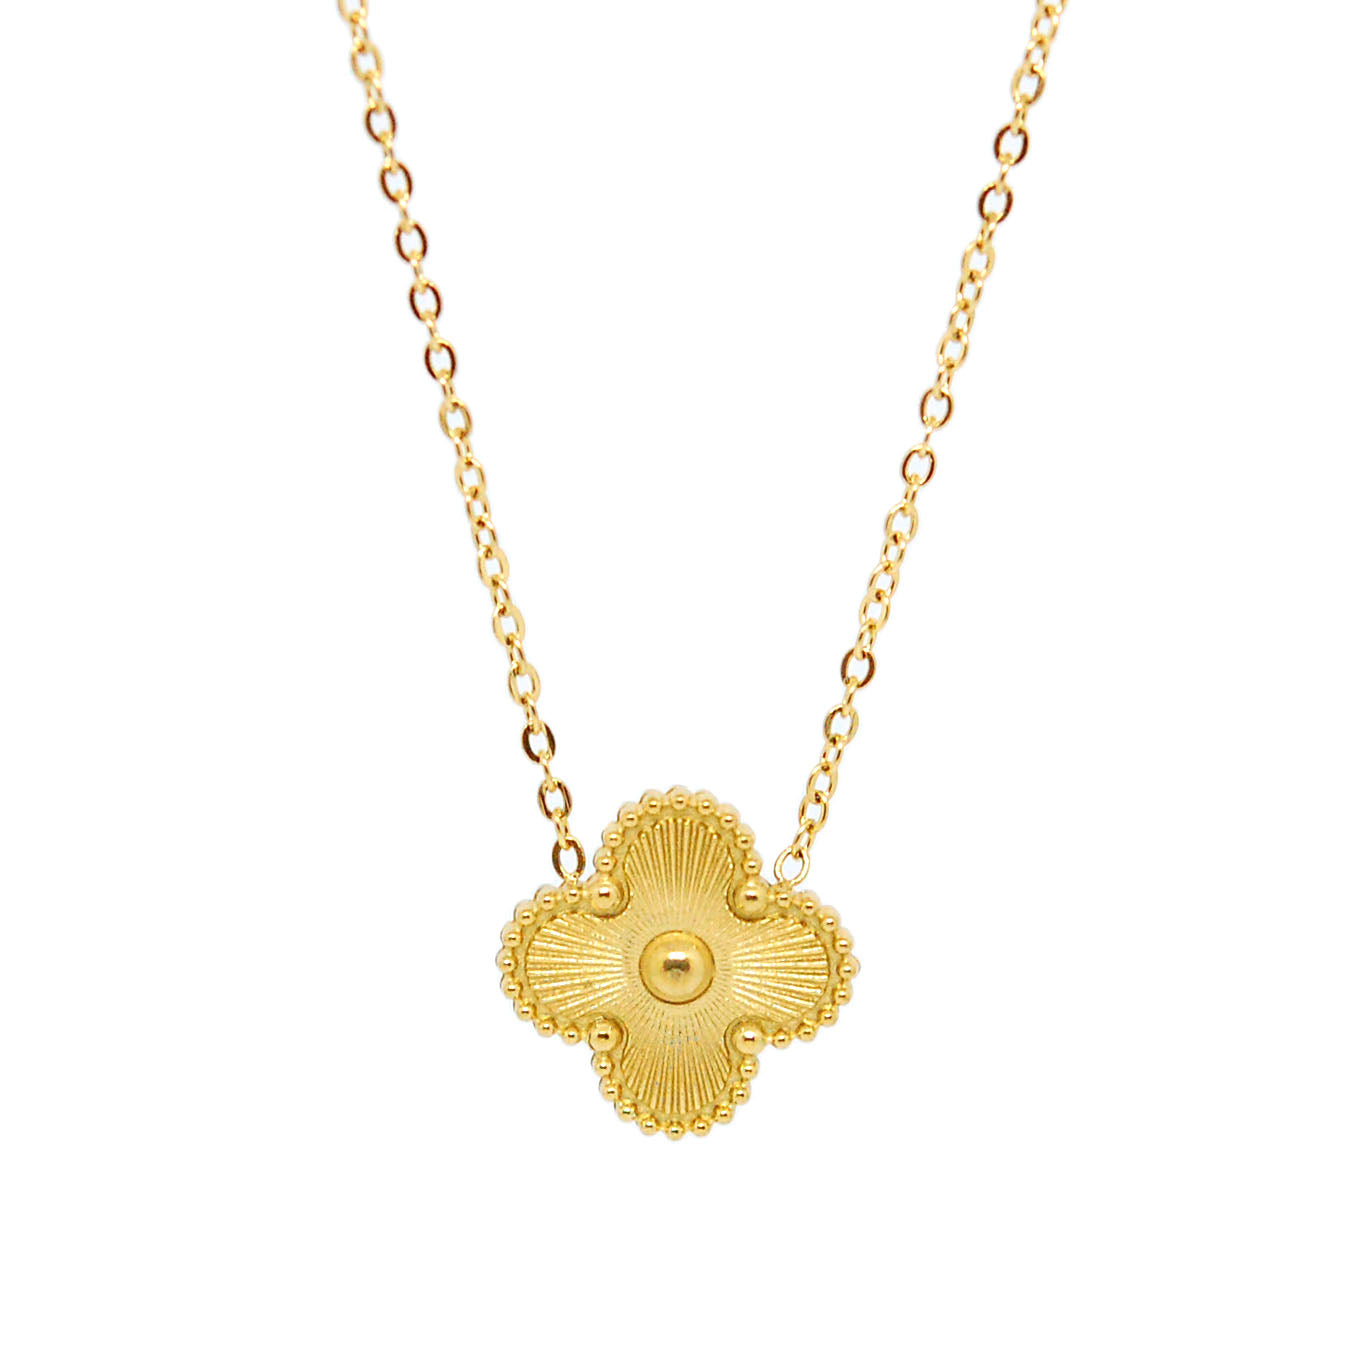 ESN 8070: All IPG Intricate Lucky Flower 19" Necklace